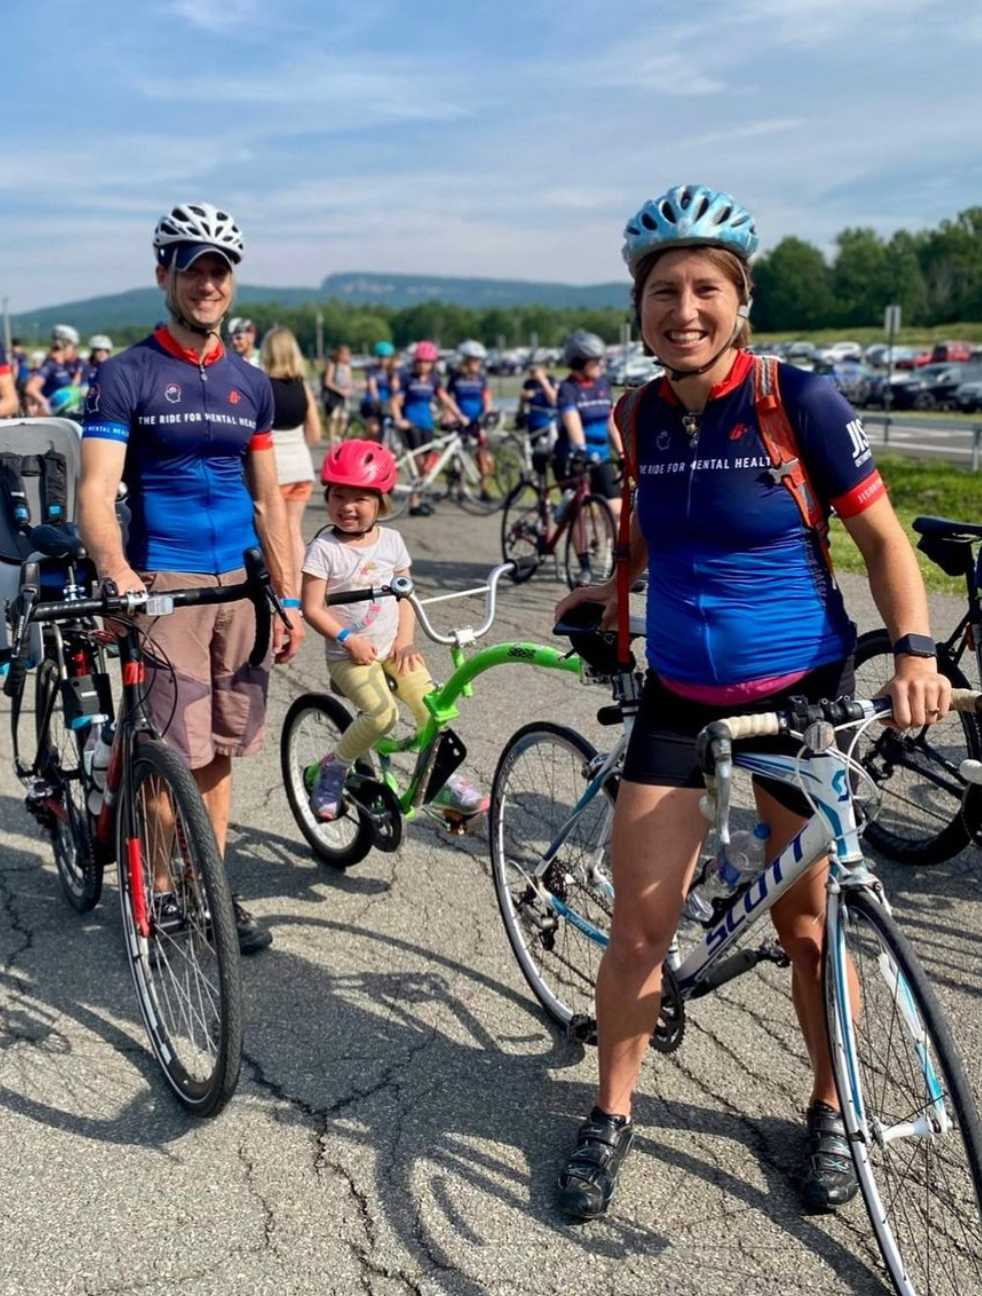 Riders at the 2022 Ride for Mental Health. Photo courtesy of the Ride for Mental Health.